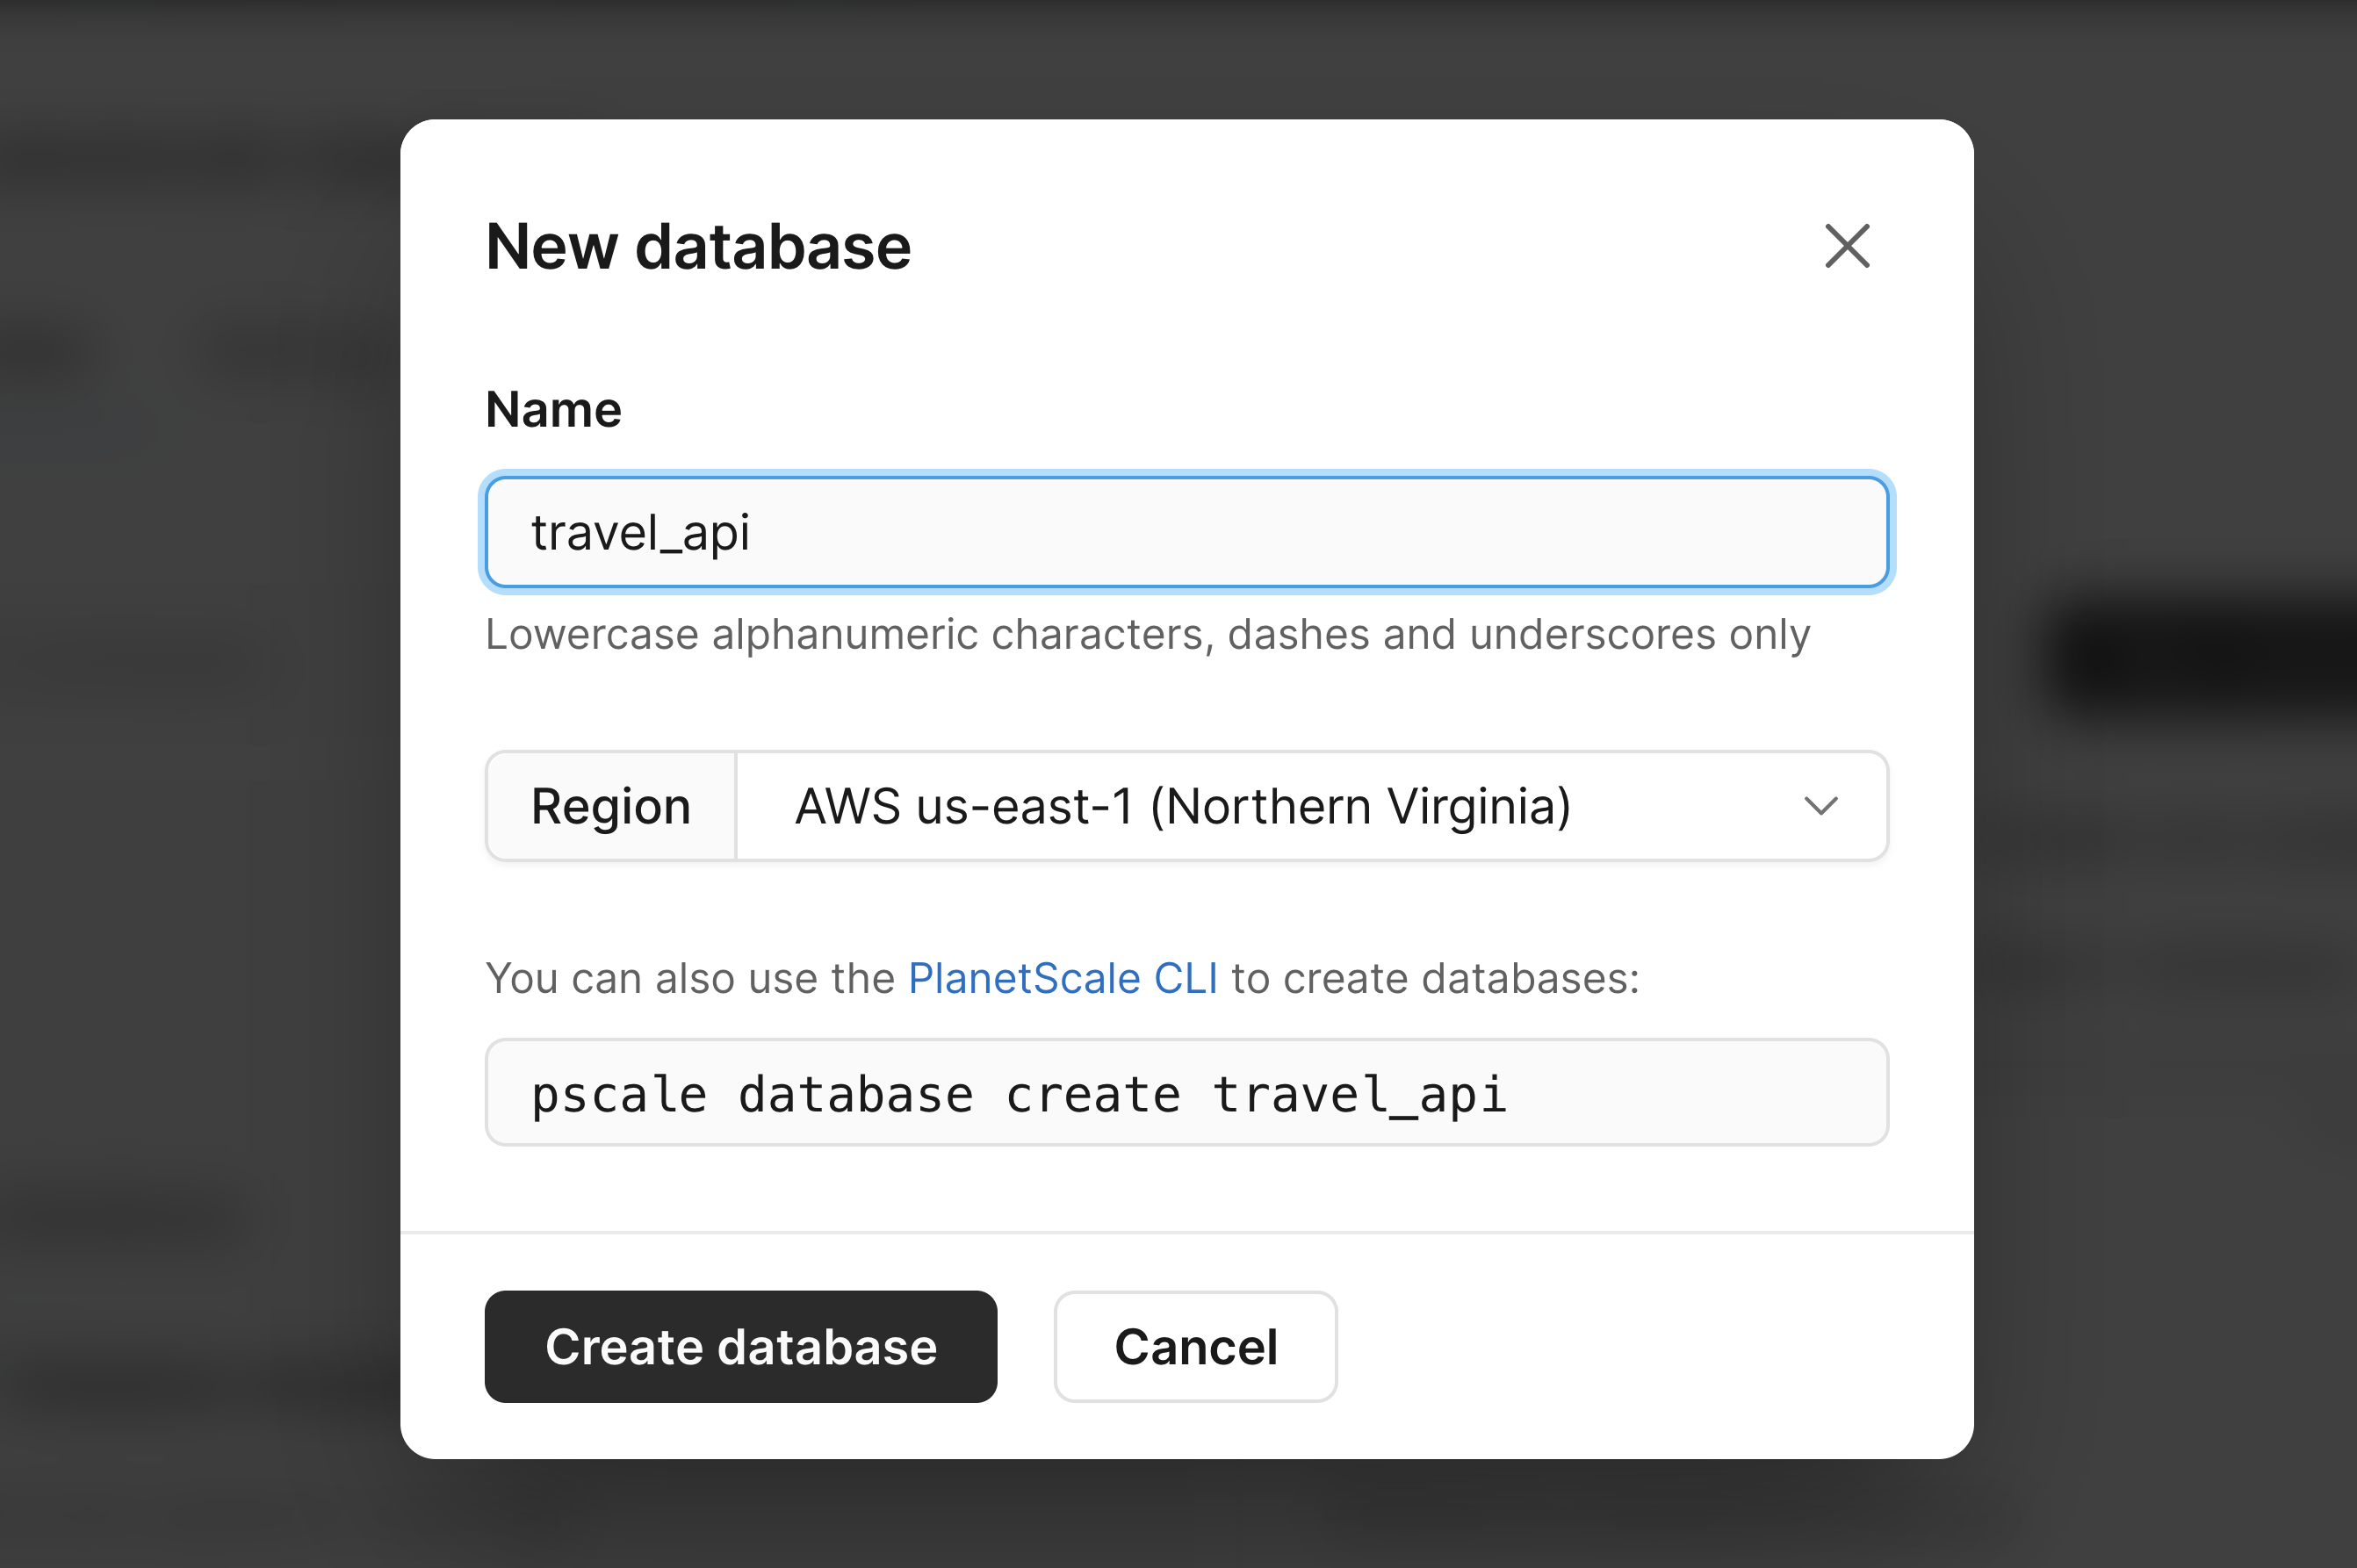 The New database modal in PlanetScale.